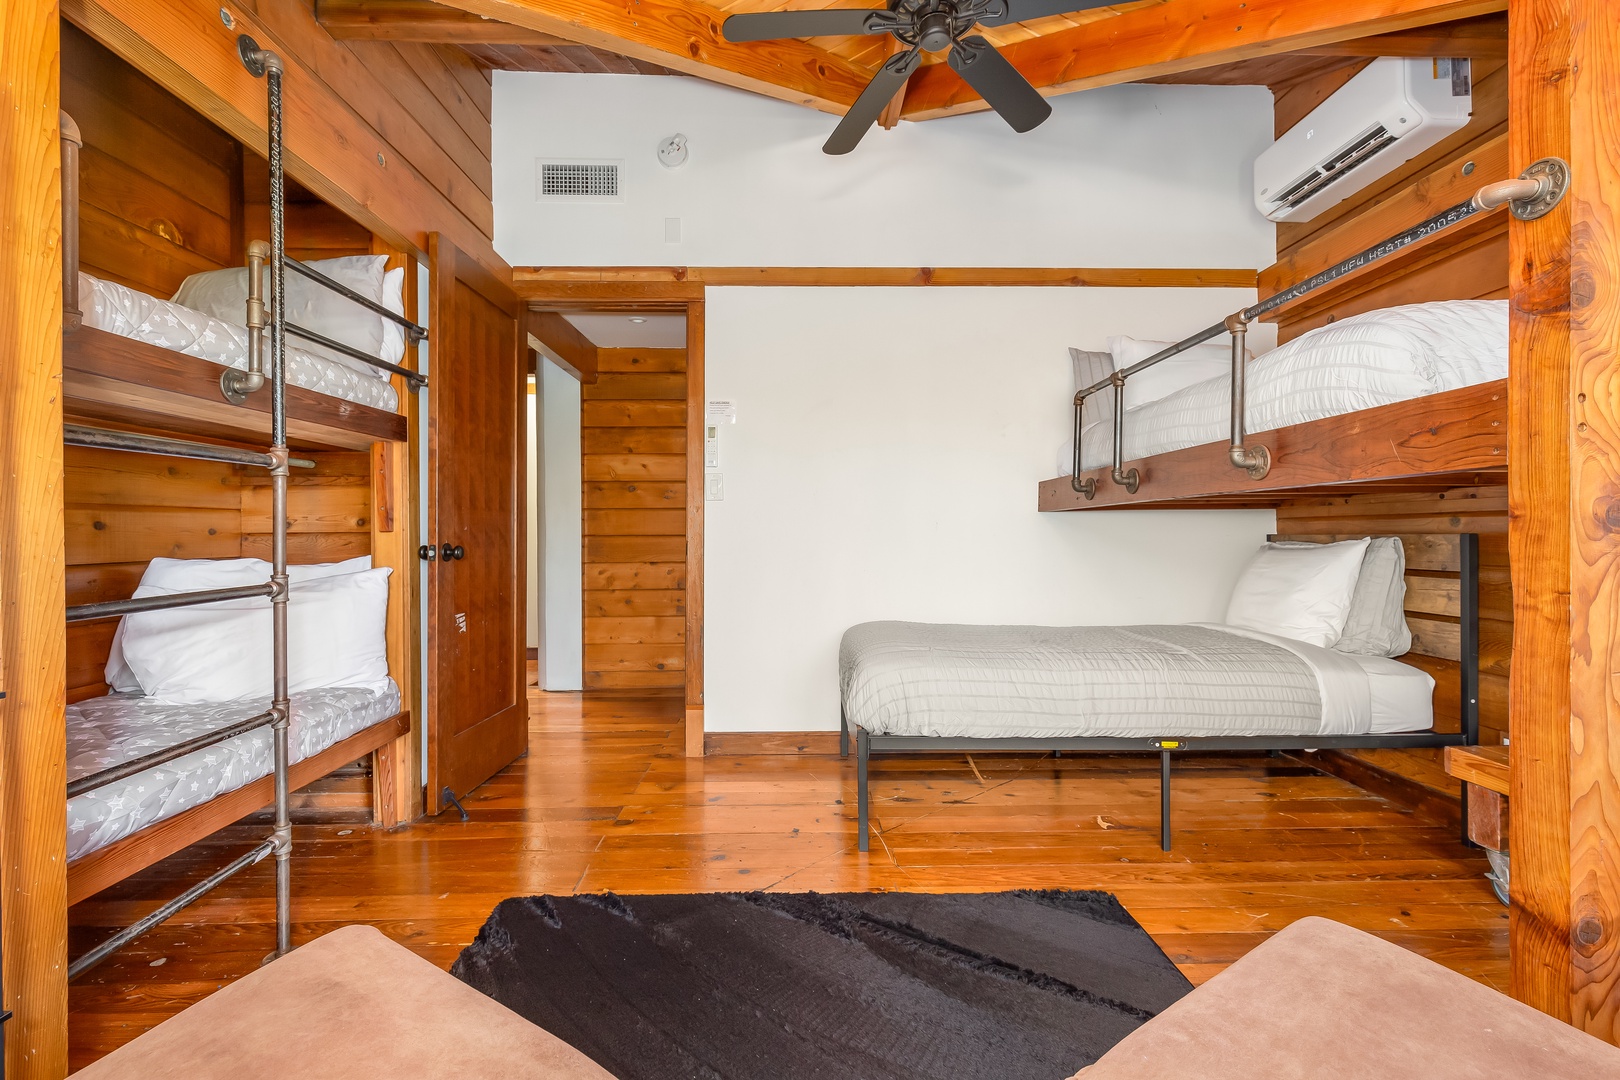 Haleiwa Vacation Rentals, Mele Makana - Guest bedroom 6, designed specifically for kids contains 2 twins & 2 toddler-size beds (crib-size mattresses) & seating